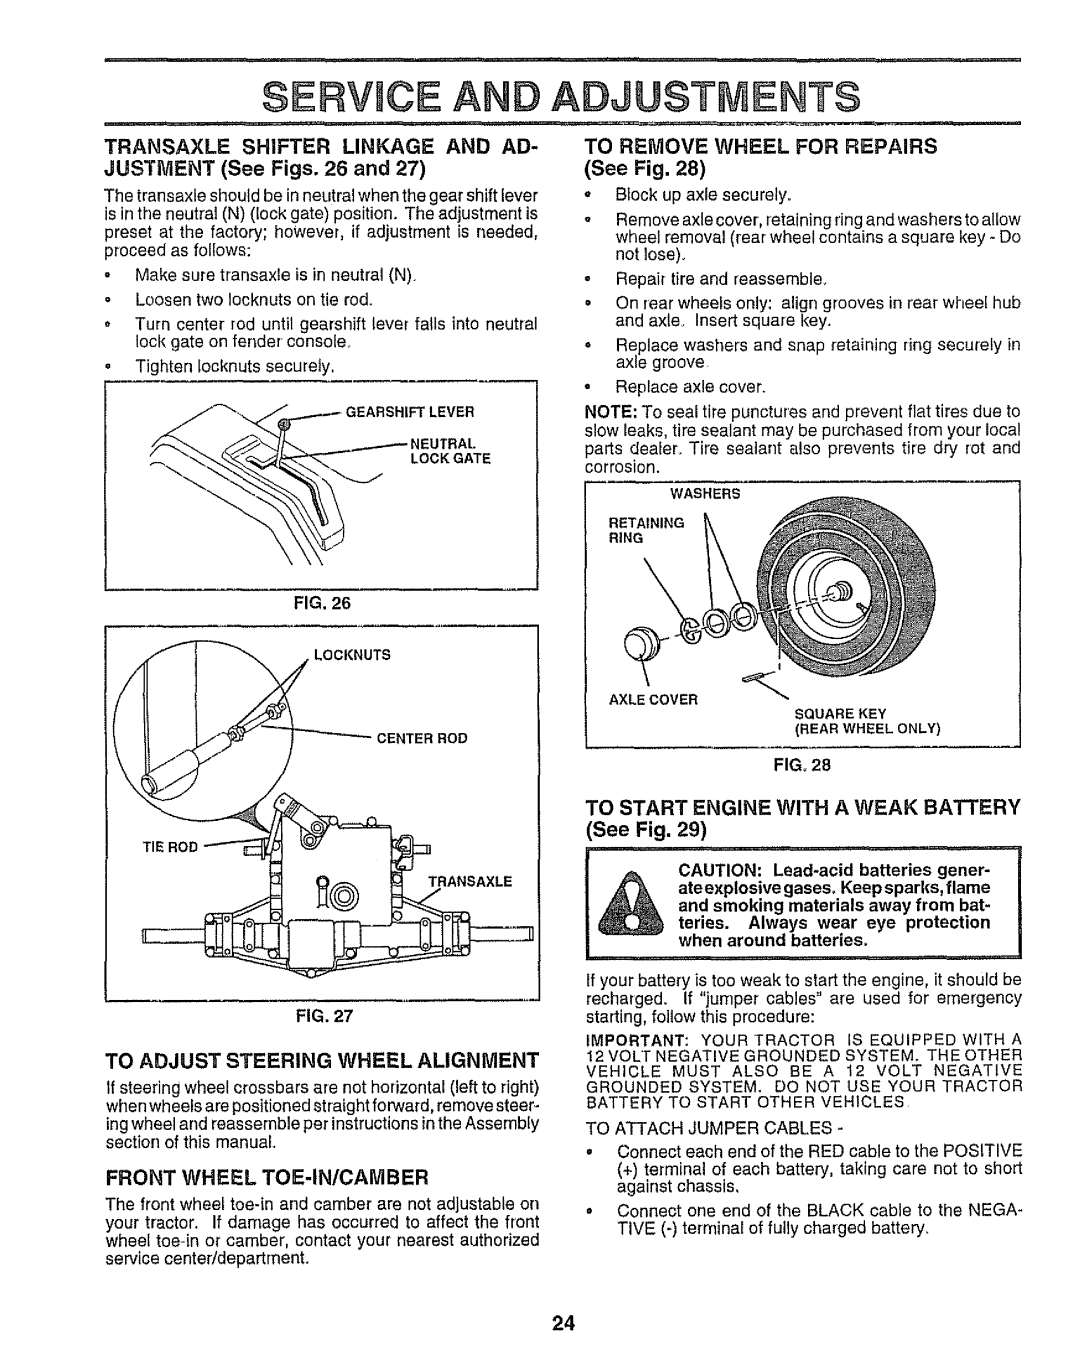 Sears 917.25958 TO START ENGINE WITH A WEAK BATTERY See Fig, To Adjust Steering Wheel Alignment, Front Wheel Toe-In/Camber 